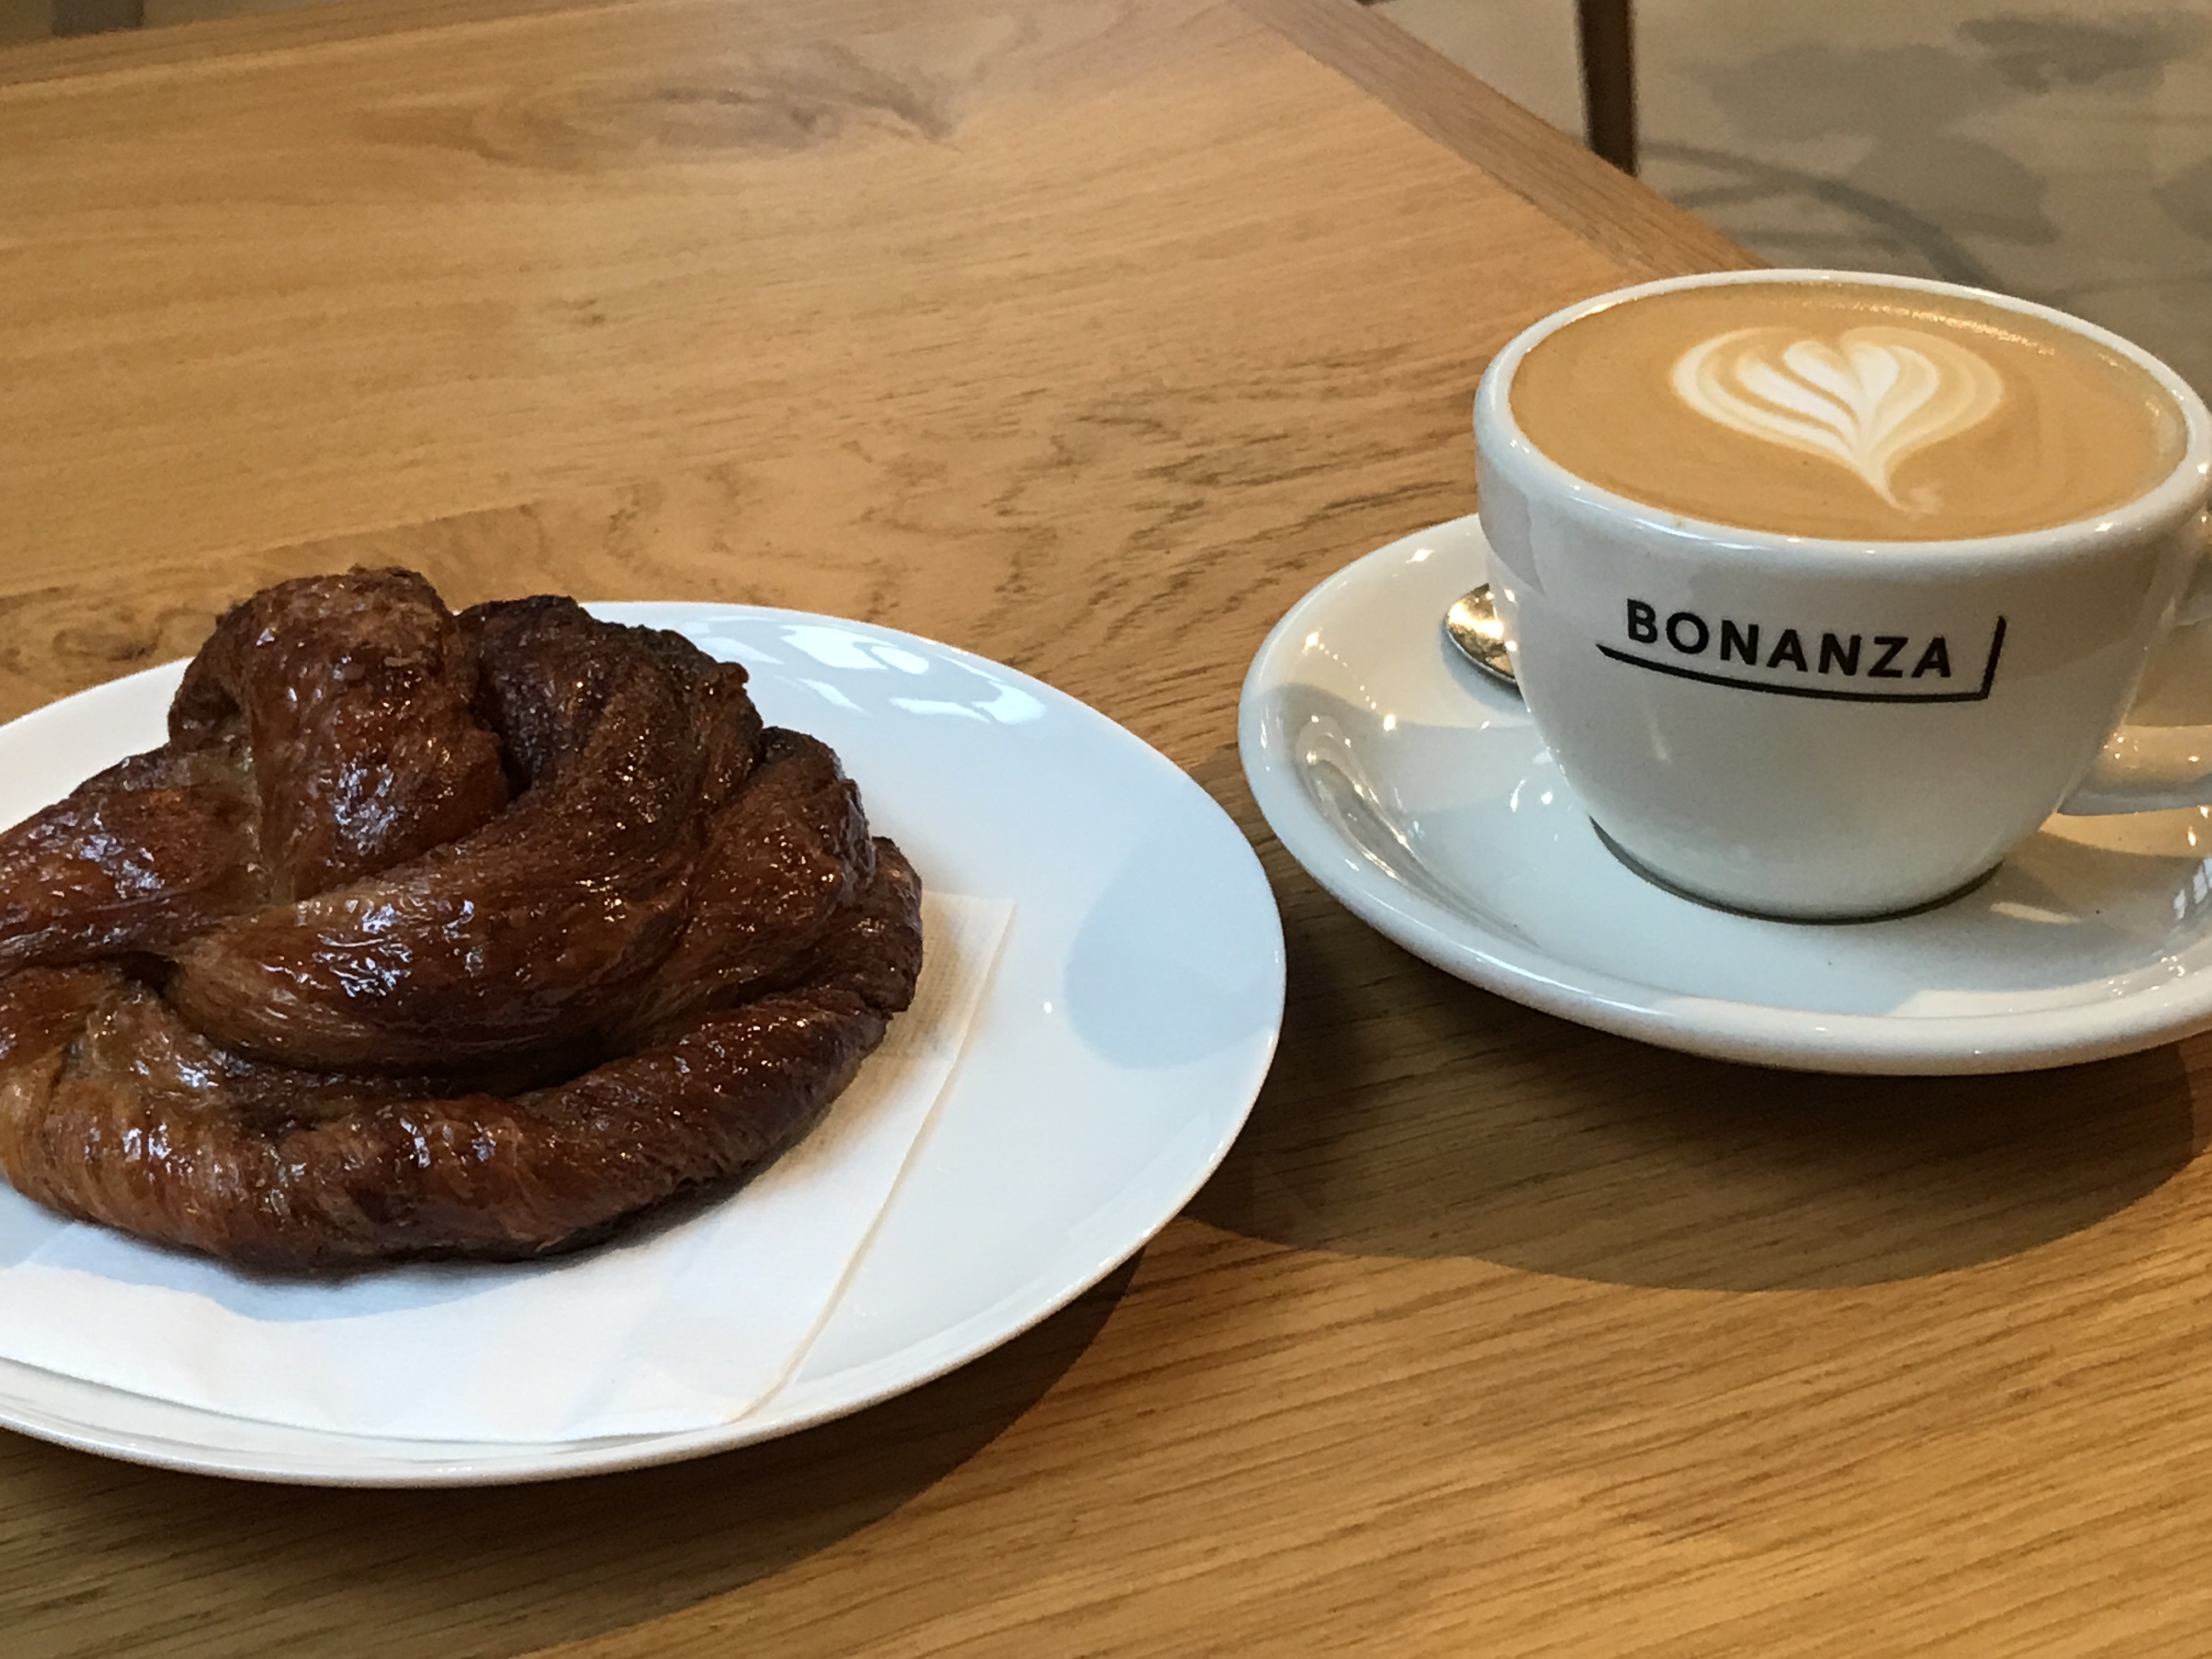 Bonanza flat white and pastry that looks like poo, but tasted like awesome.